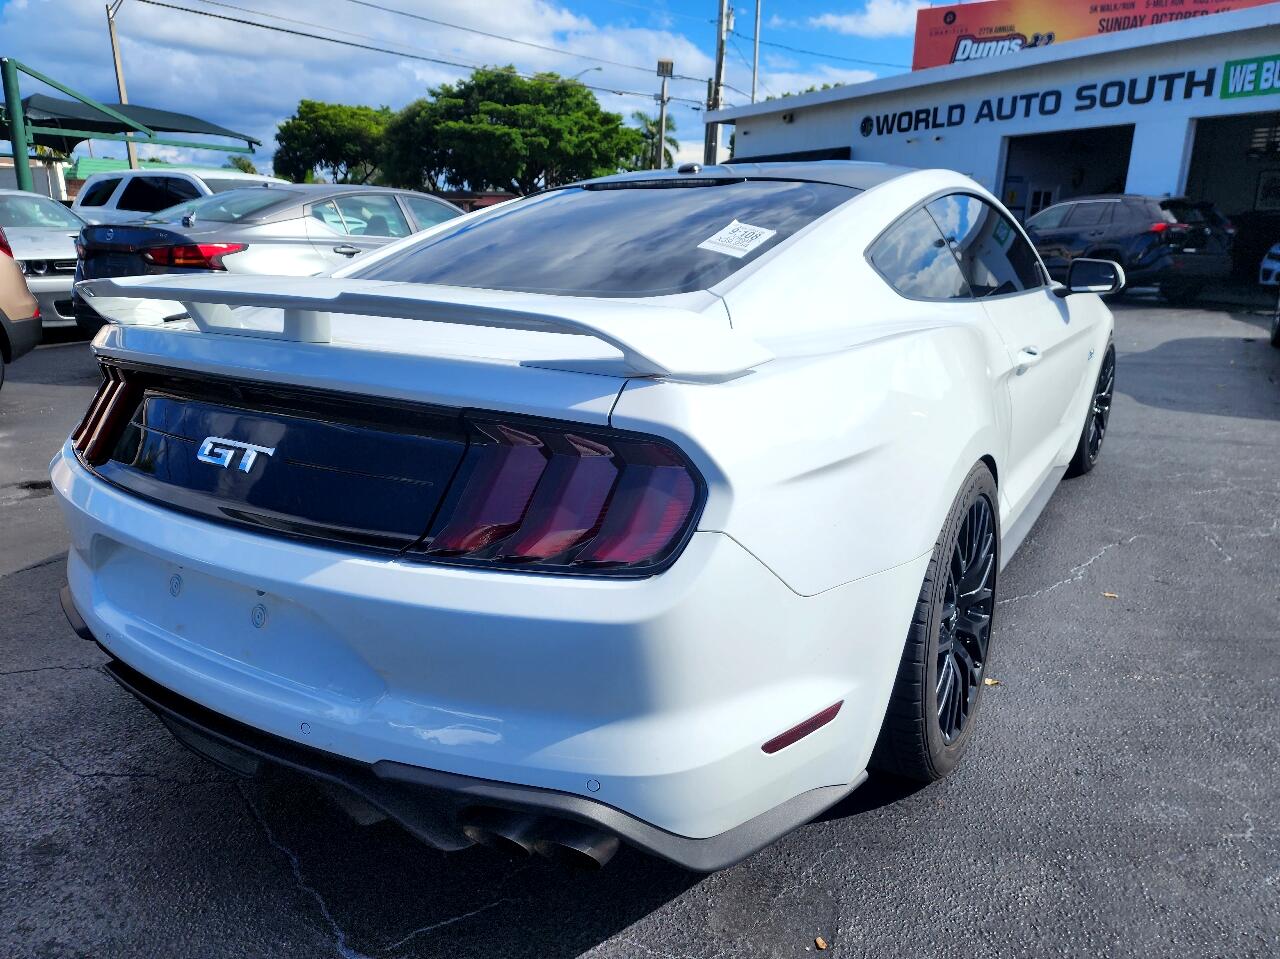 2019 FORD Mustang Coupe - $31,999